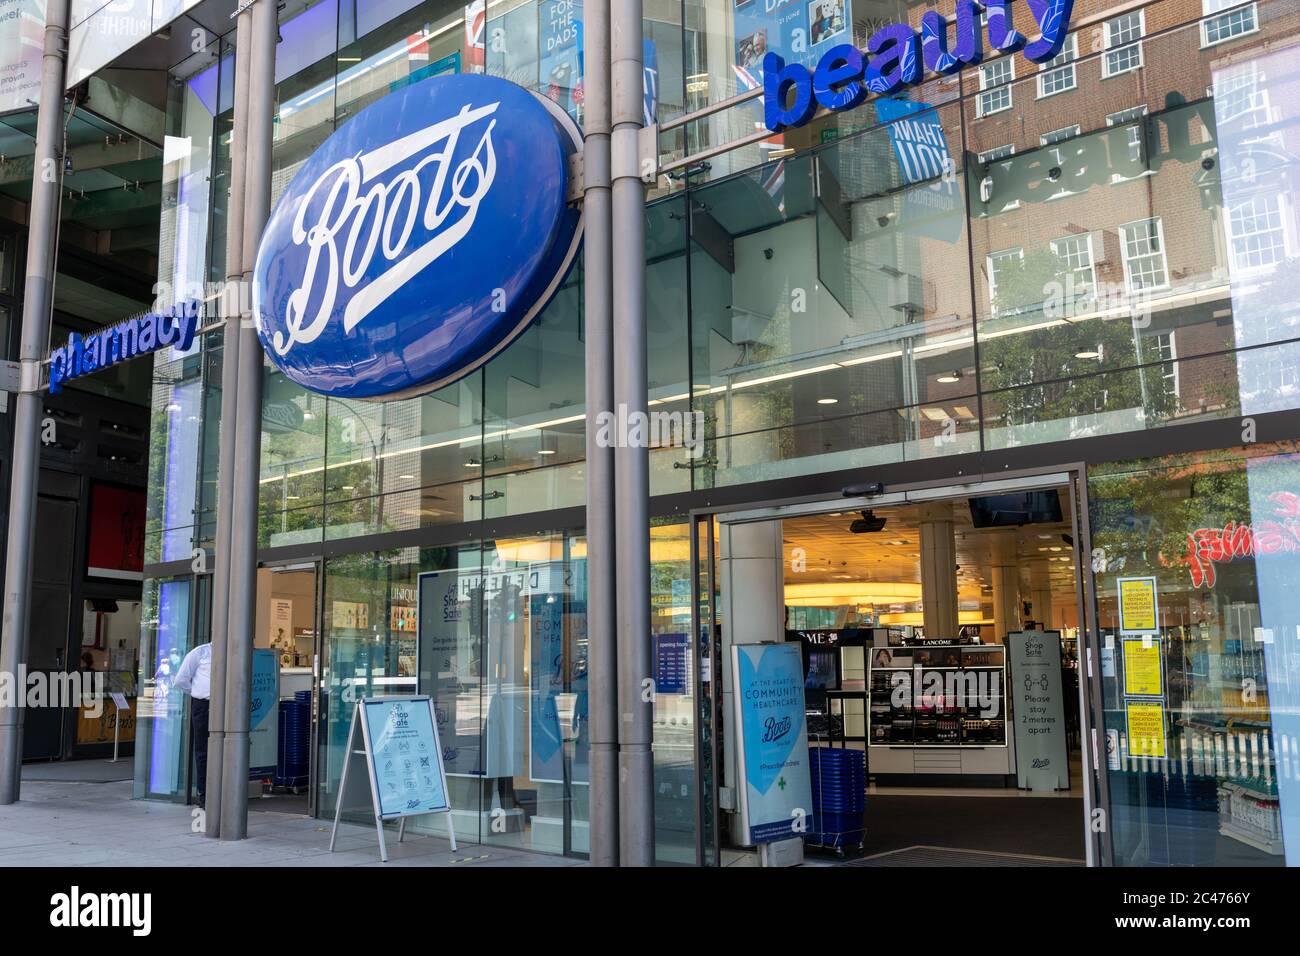 The shop sign and logo of the British chemist and beauty products retailer Boots. Stock Photo